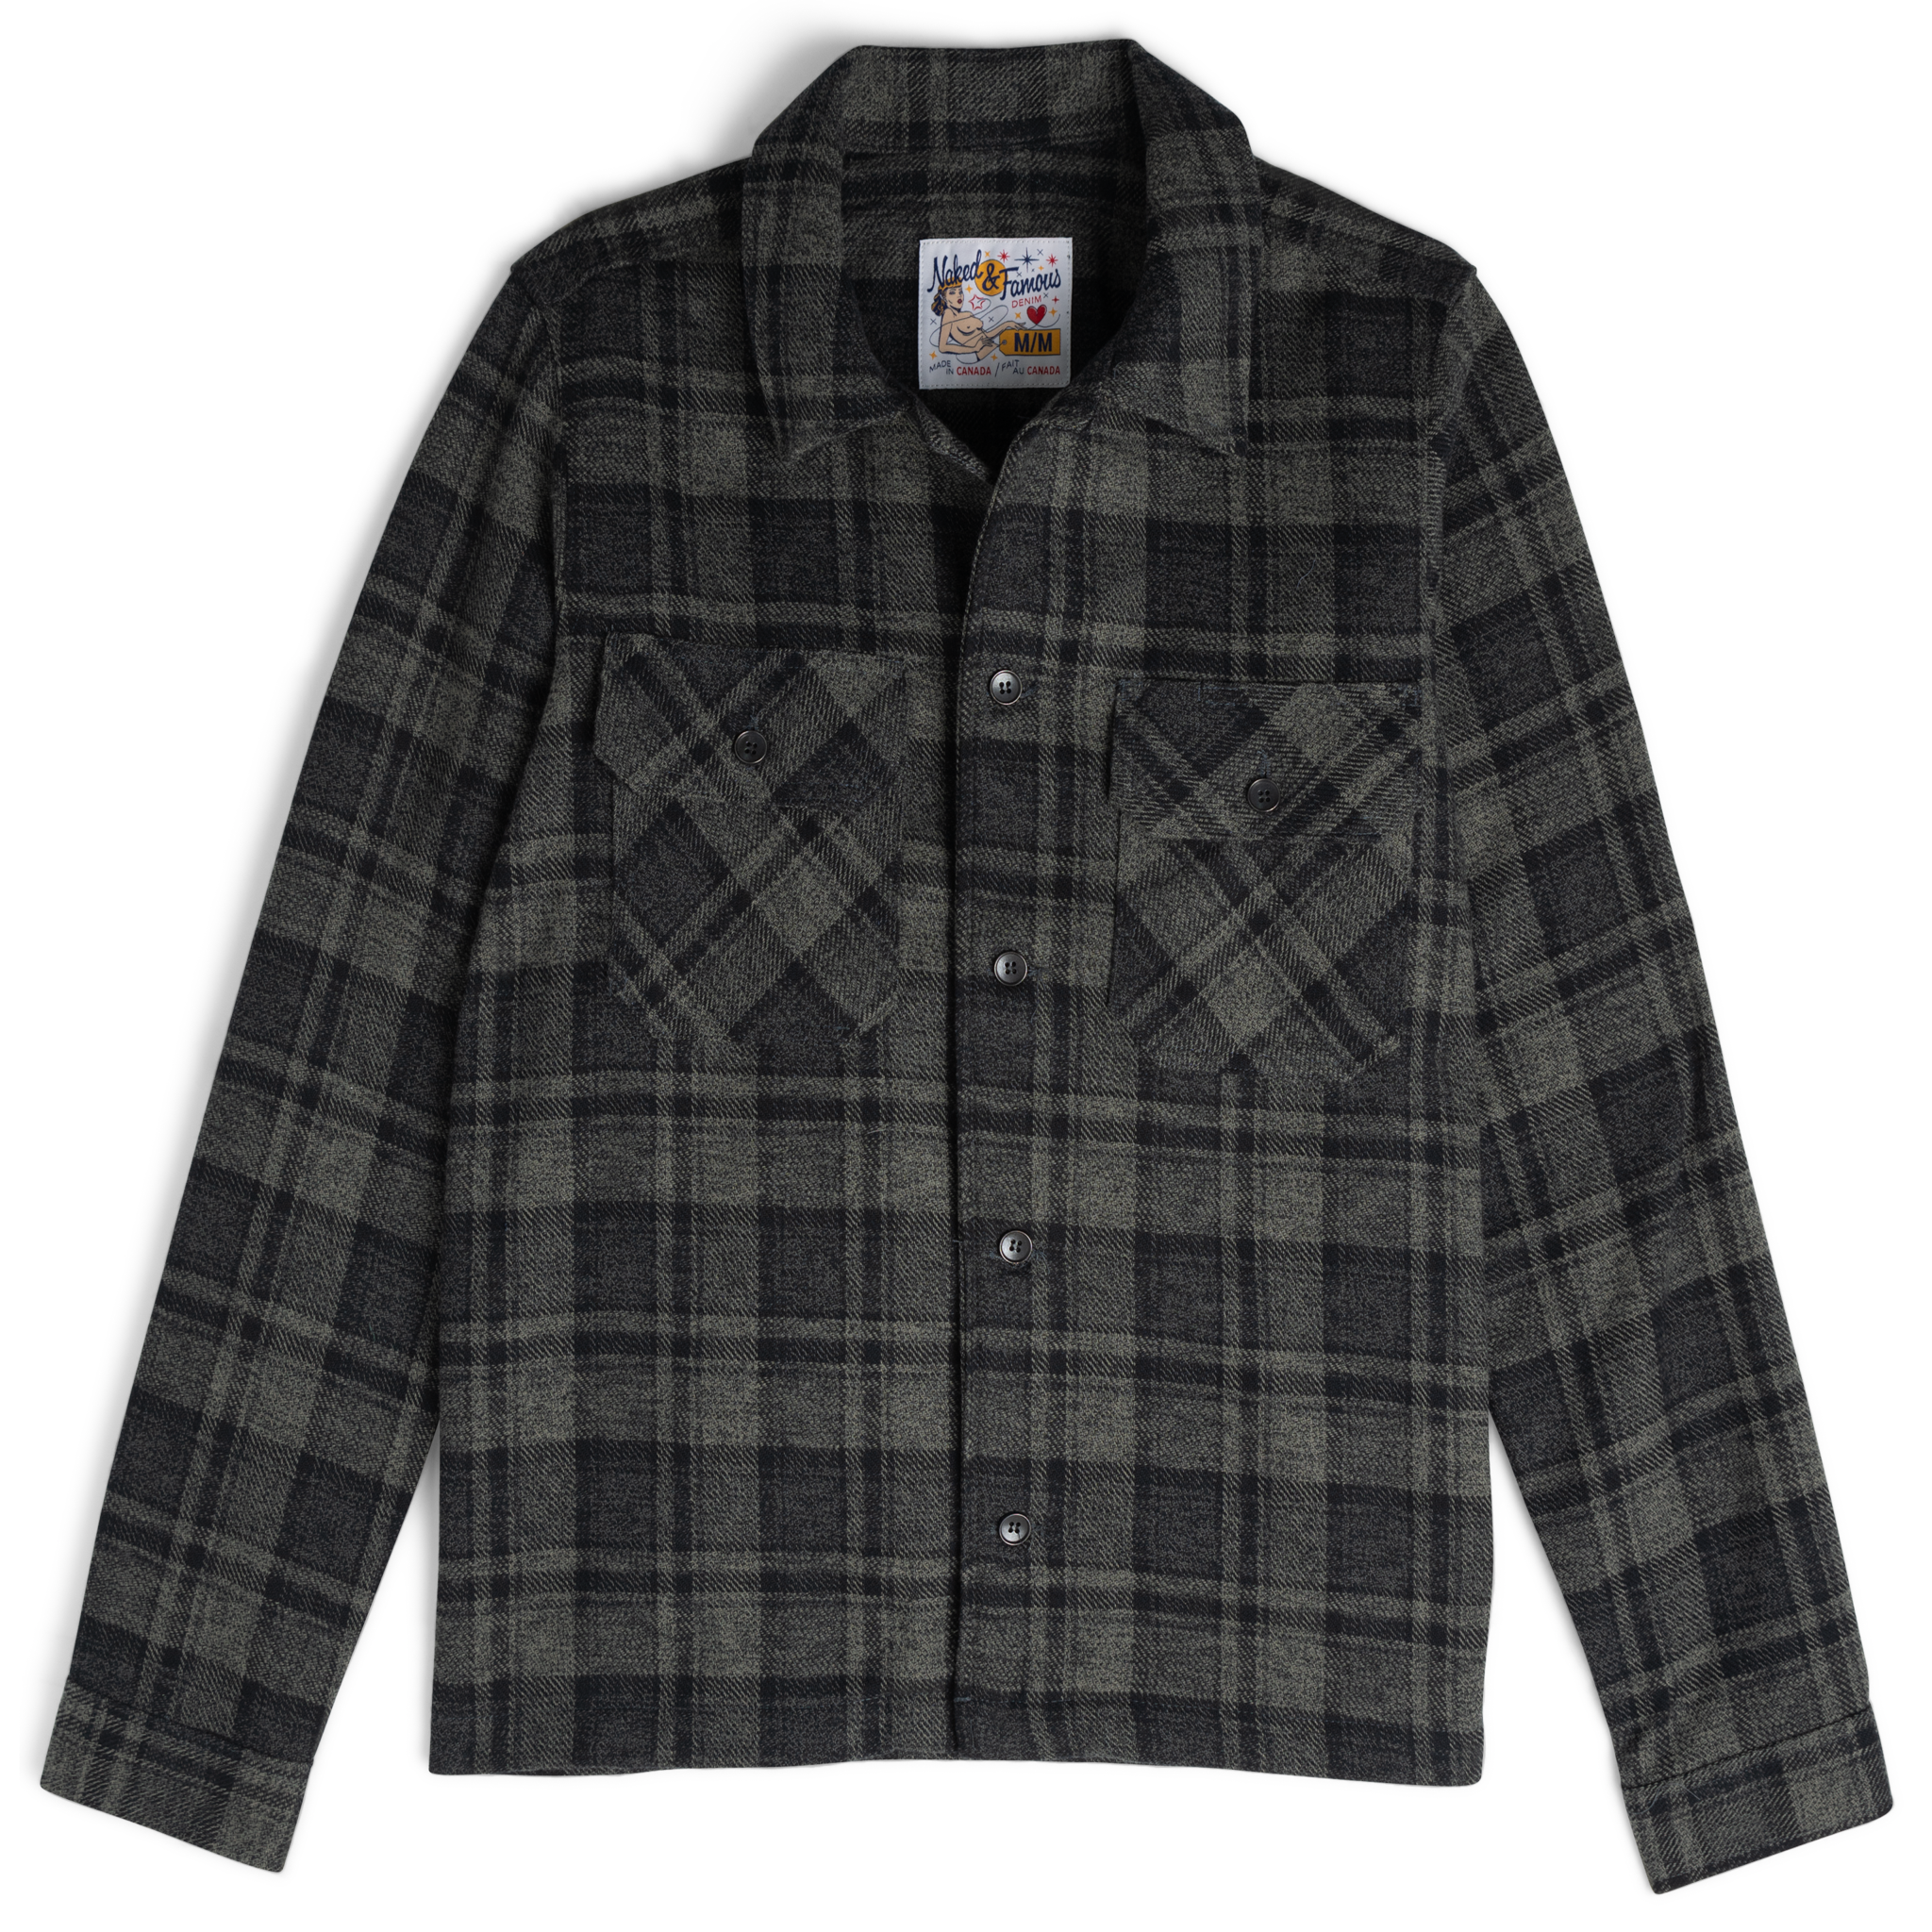  Work Shirt - Heavy Vintage Flannel - Charcoal - flat front 